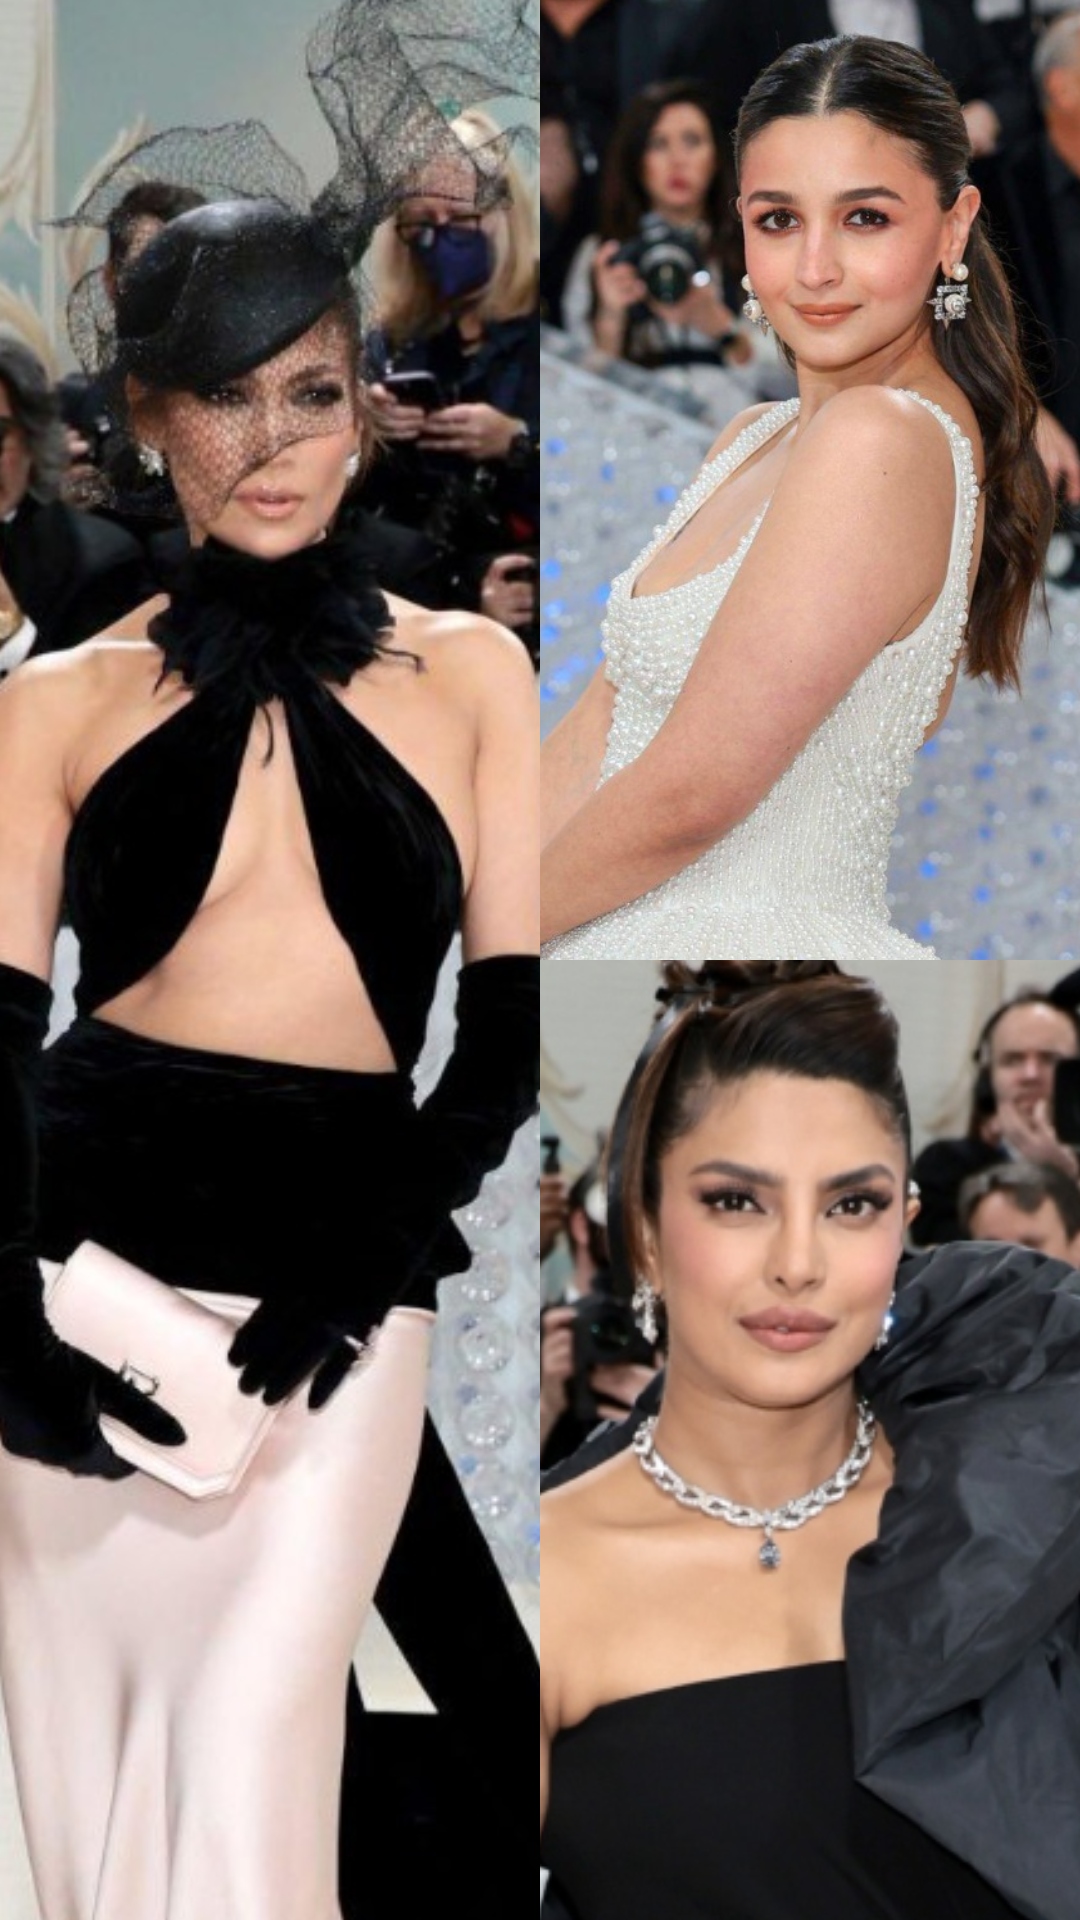 Jennifer Lopez in sultry gown to Alia Bhatt and Priyanka Chopra's long trails: Who wore what at Met Gala 2023